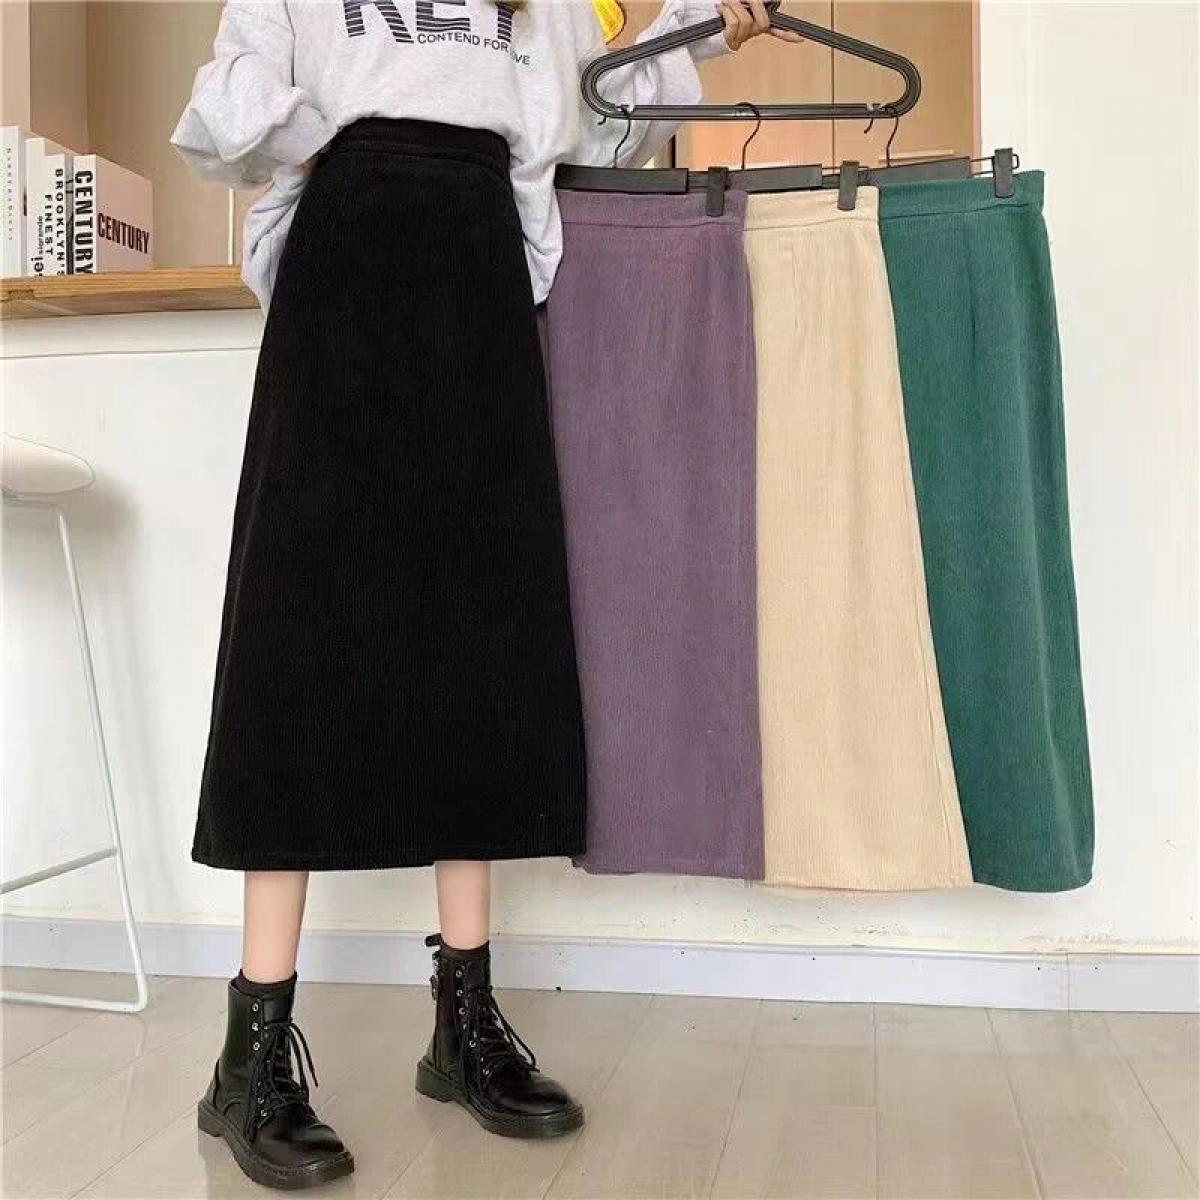 Xpqbb  Fashion Corduroy Skirts Ladies Autumn Winter Casual High Waisted Skirts Women College Style Loose A Line Skirt Gi